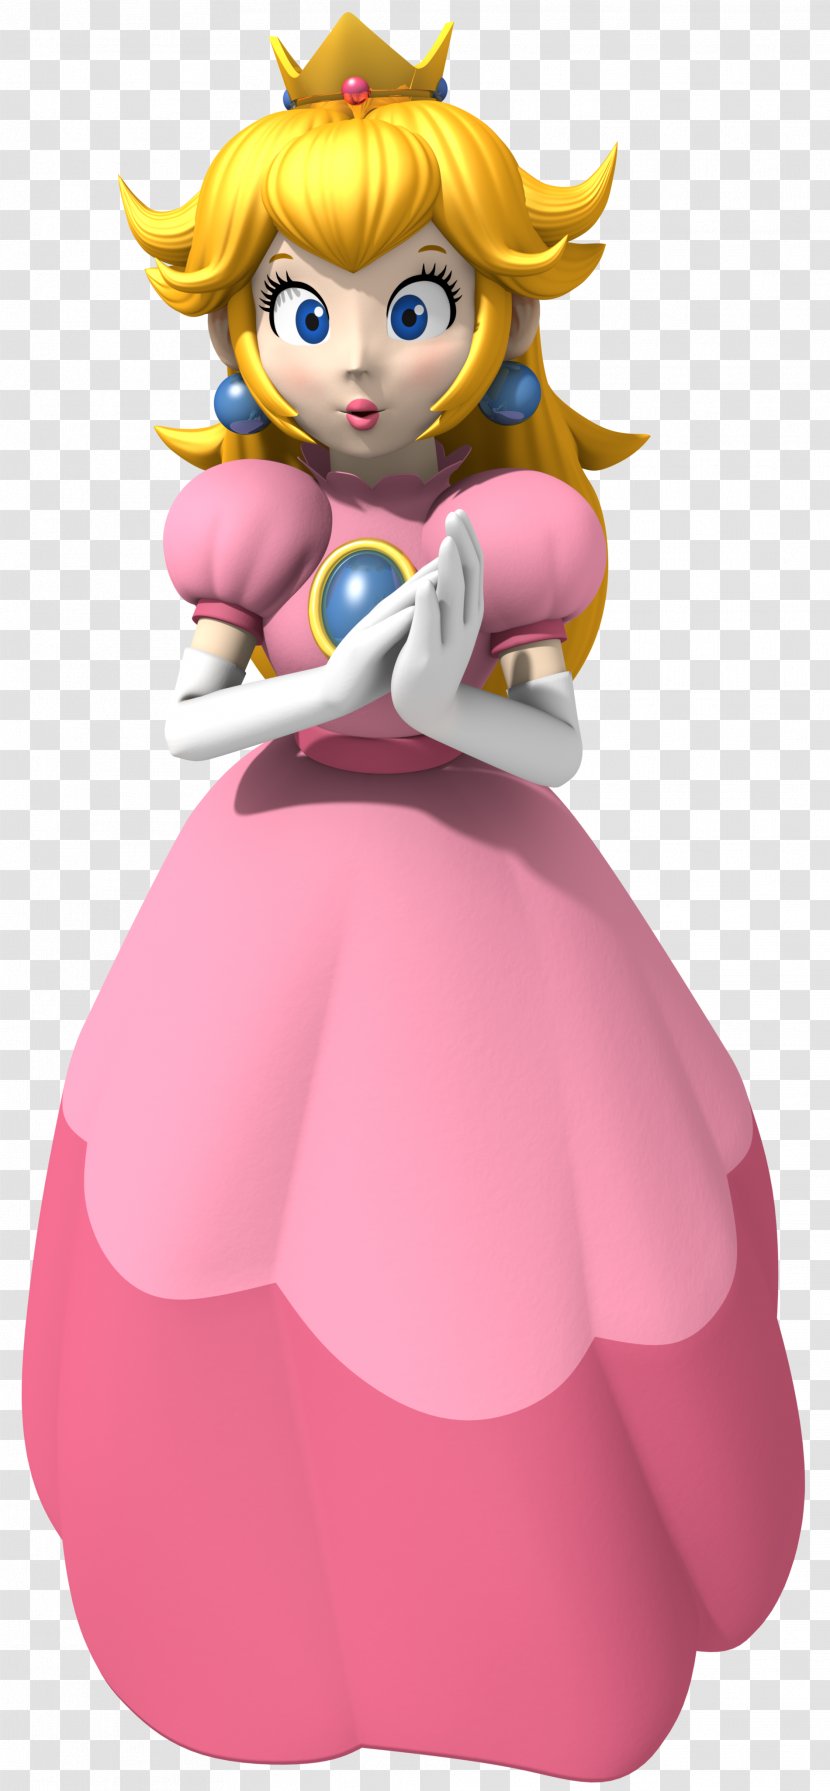 Super Mario Bros. Princess Peach Kart 64 All-Stars Strikers Charged - Heart - Transparent Background Transparent PNG